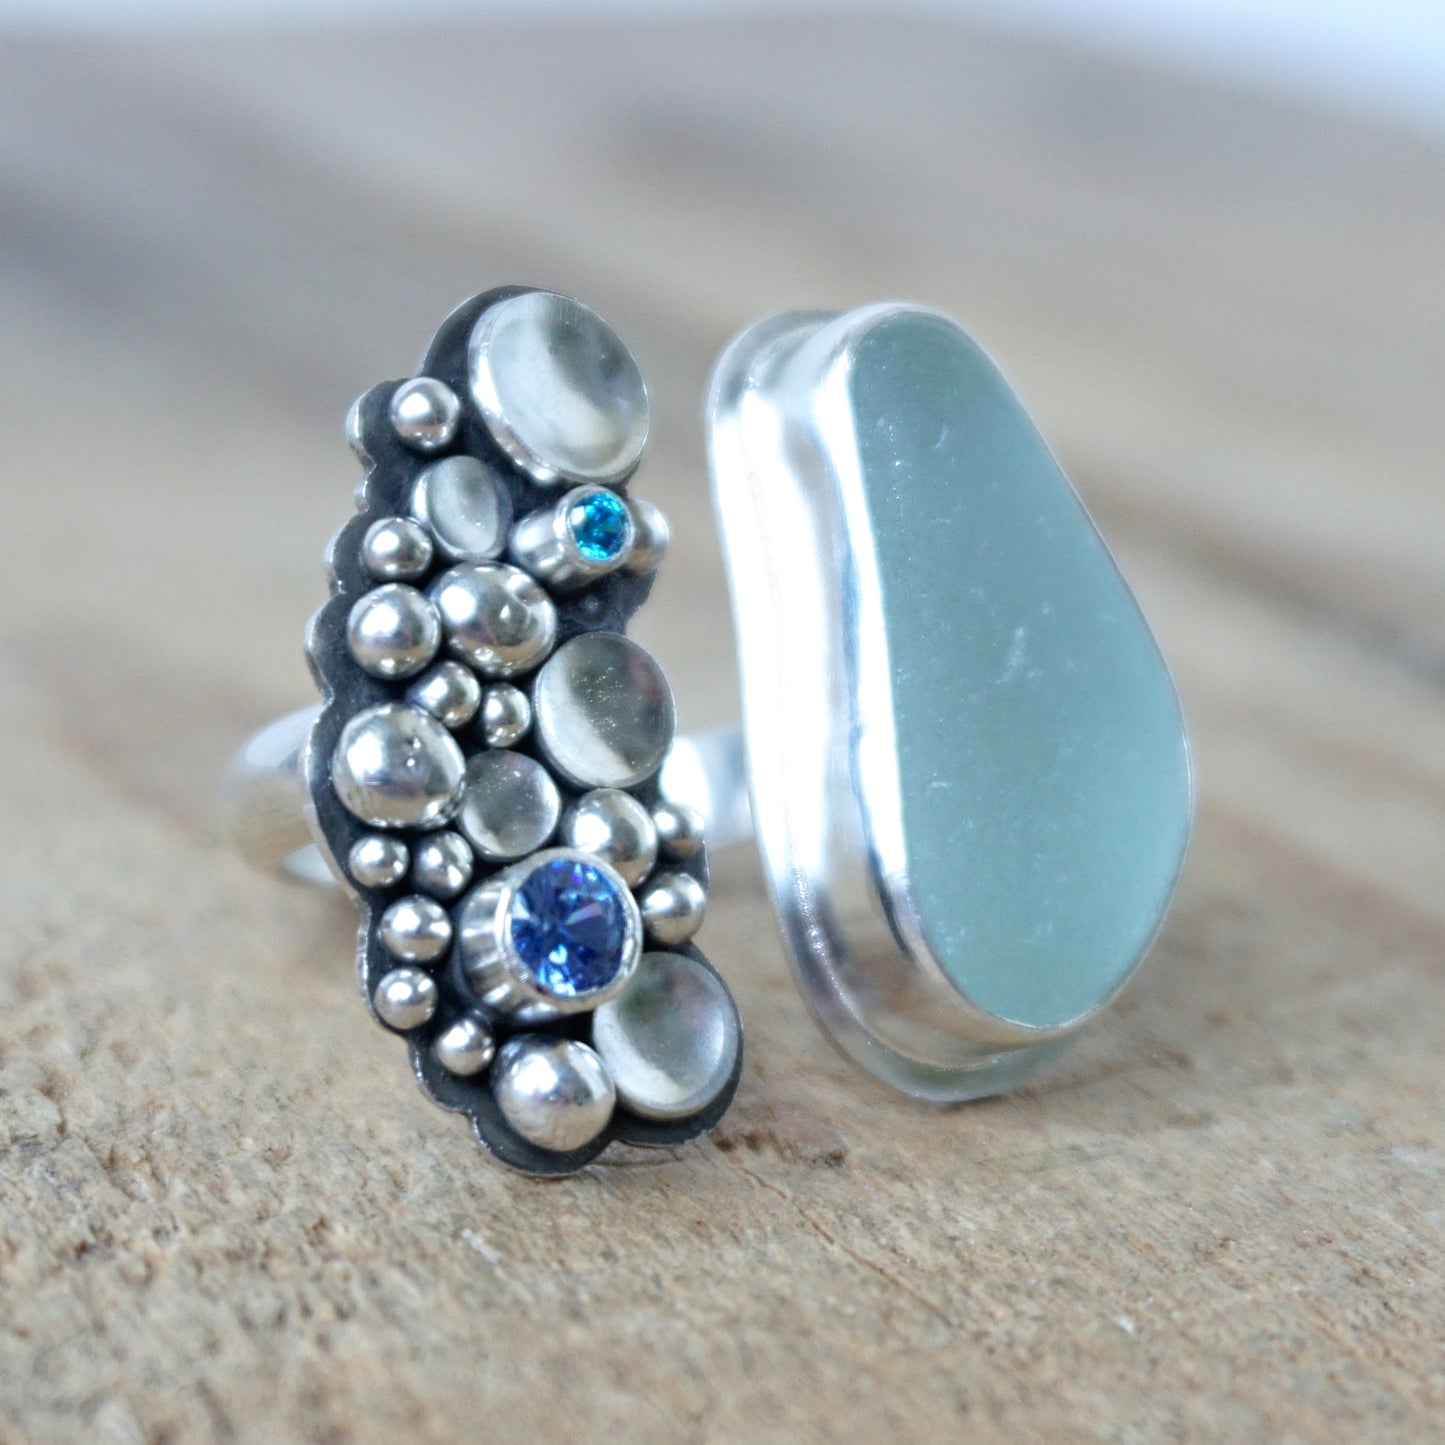 Size 7 1/2 Seafoam Green Sea Glass Open Ring with Blue Cubic Zirconia